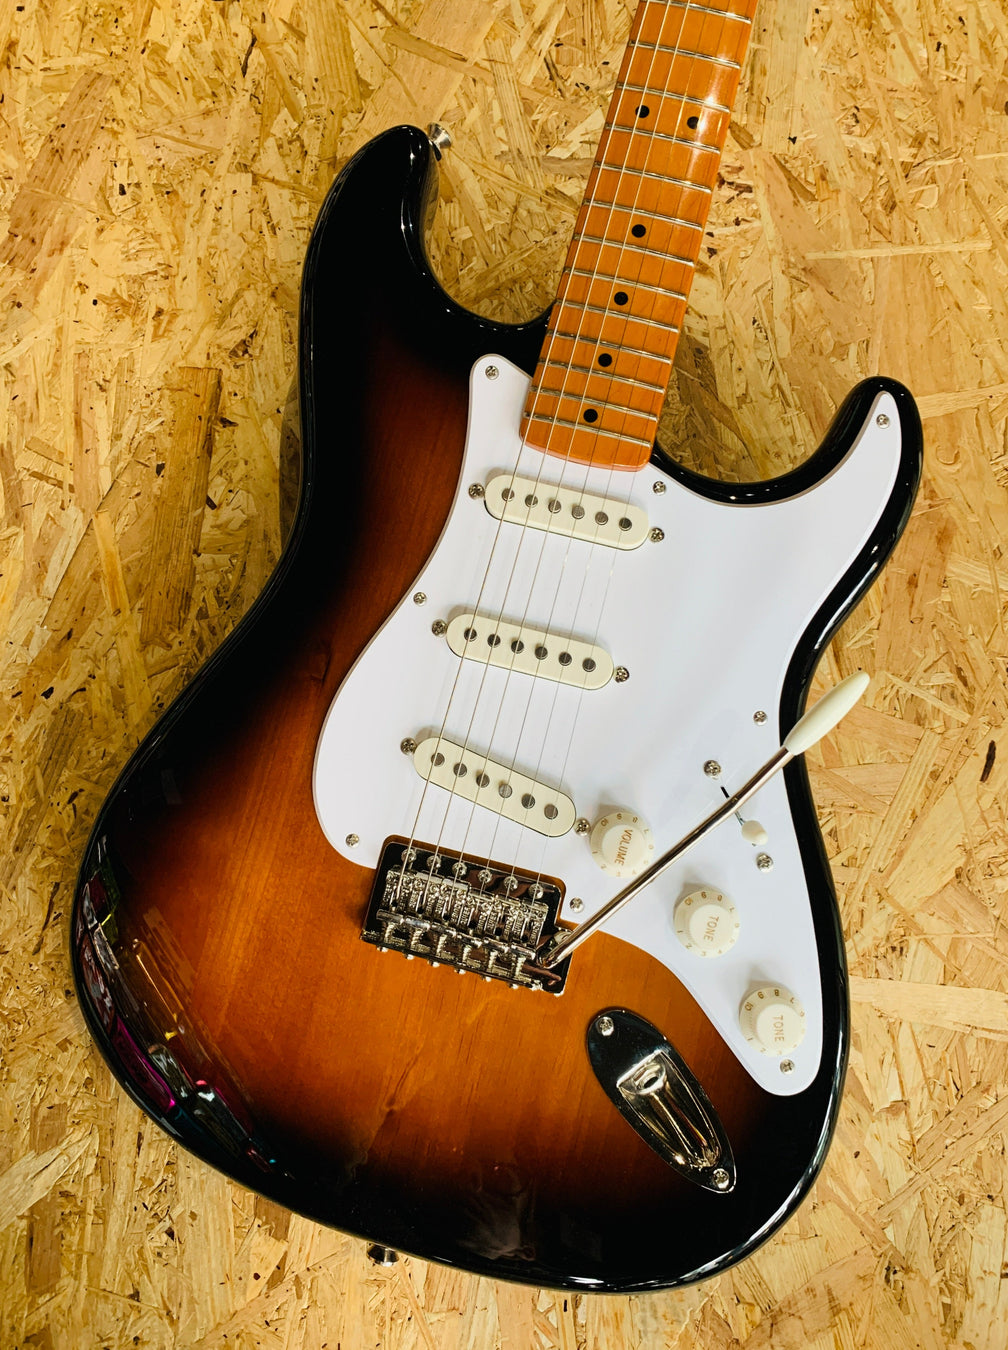 Pre-Owned Squier Classic Vibe 50s Stratocaster - 2 Tone Sunburst - Guitar Warehouse